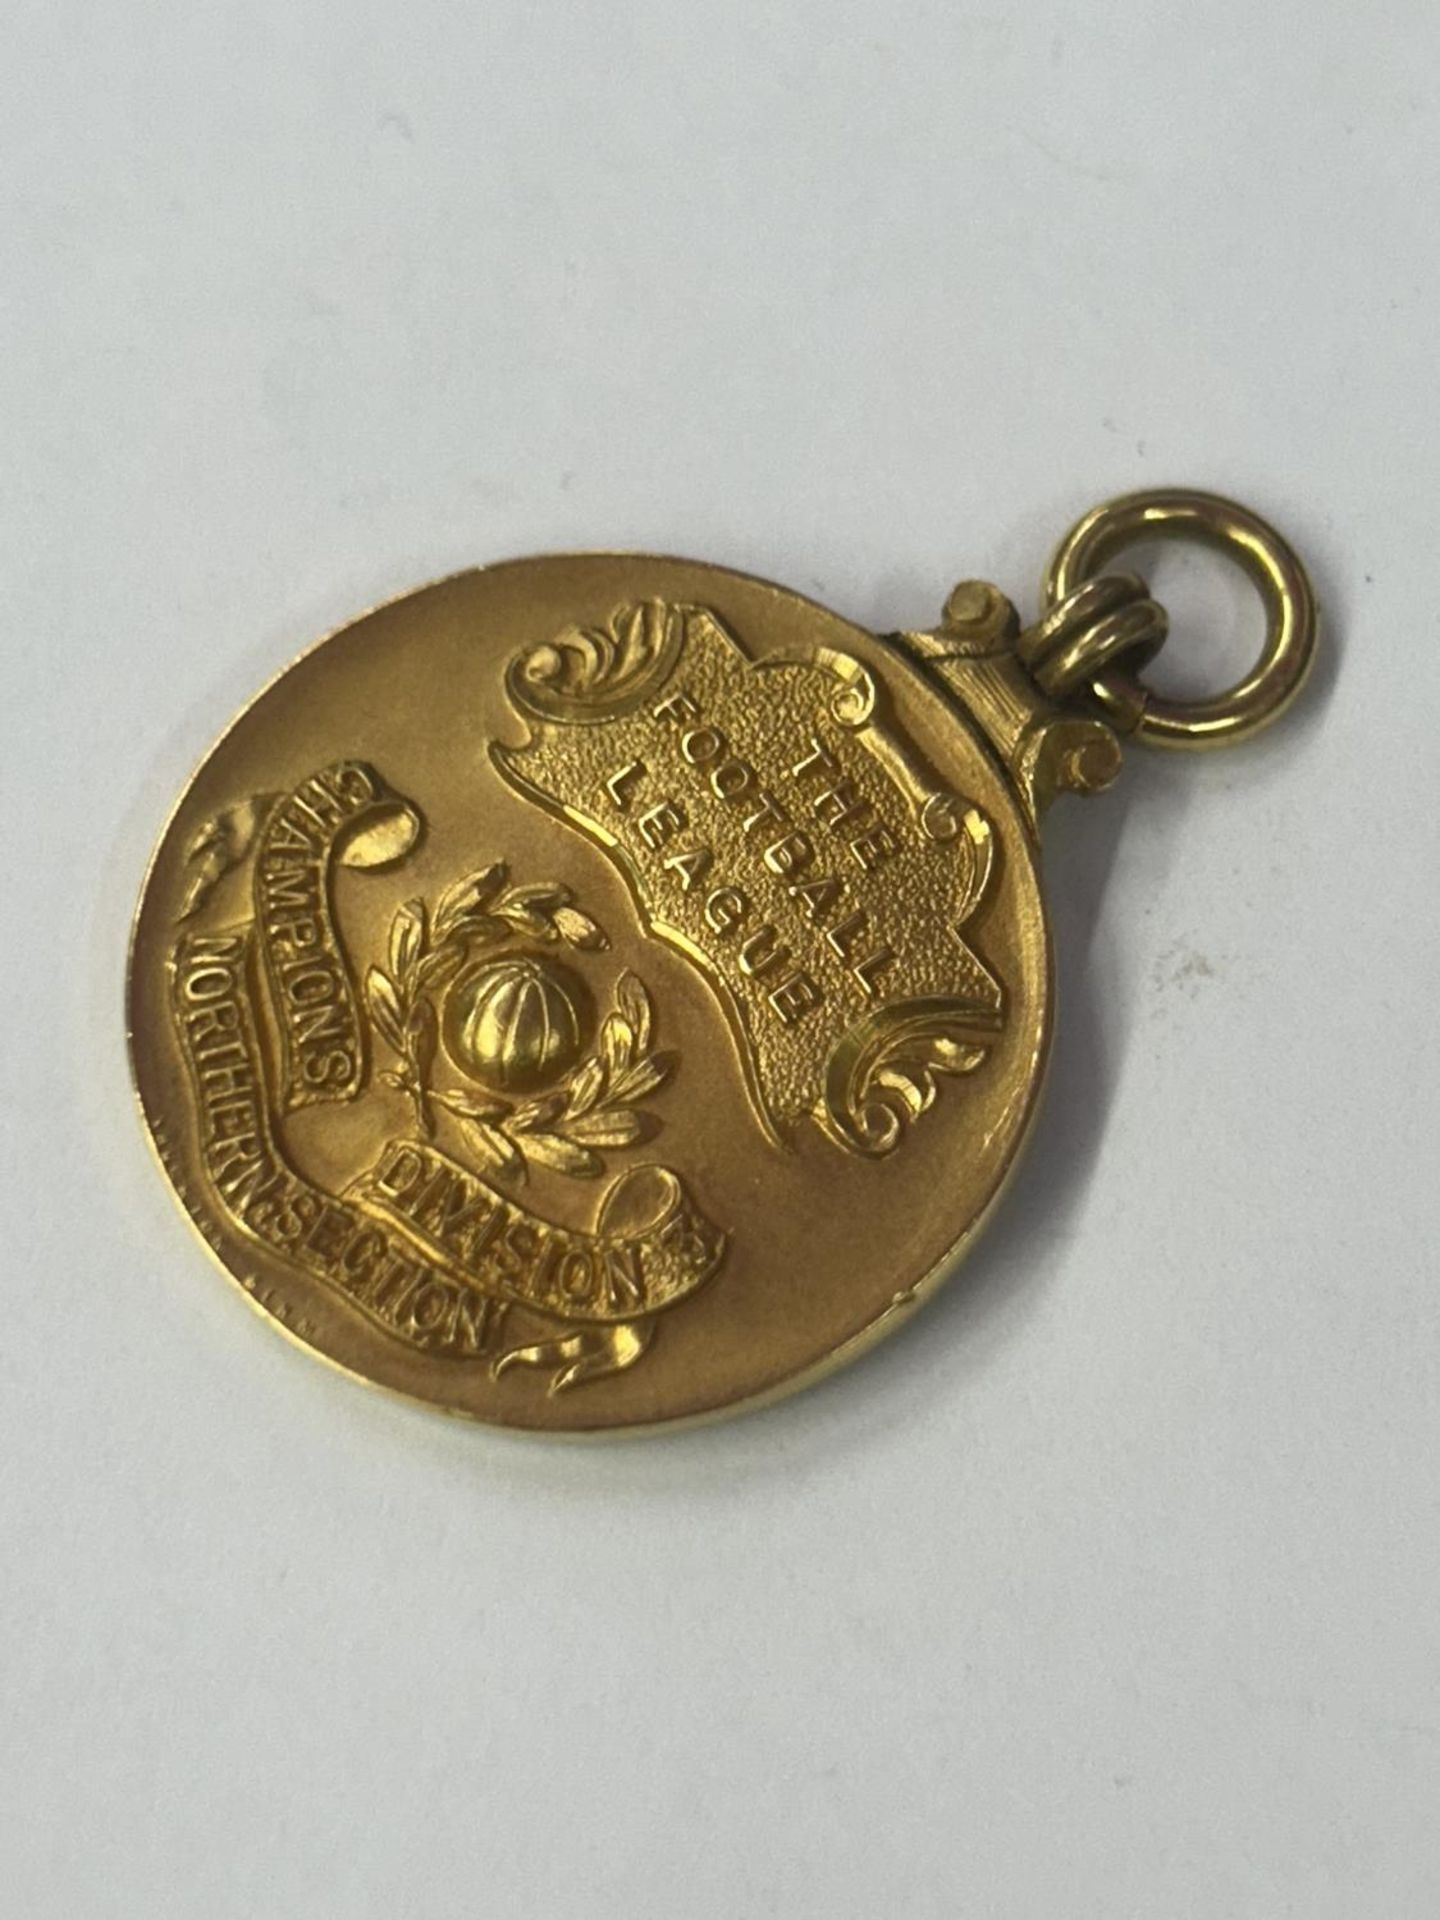 A HALLMARKED 9 CARAT GOLD FOOTBALL LEAGUE DIVISION 3 NORTHERN SECTION LEAGUE WINNERS MEDAL 1953-1954 - Image 4 of 5